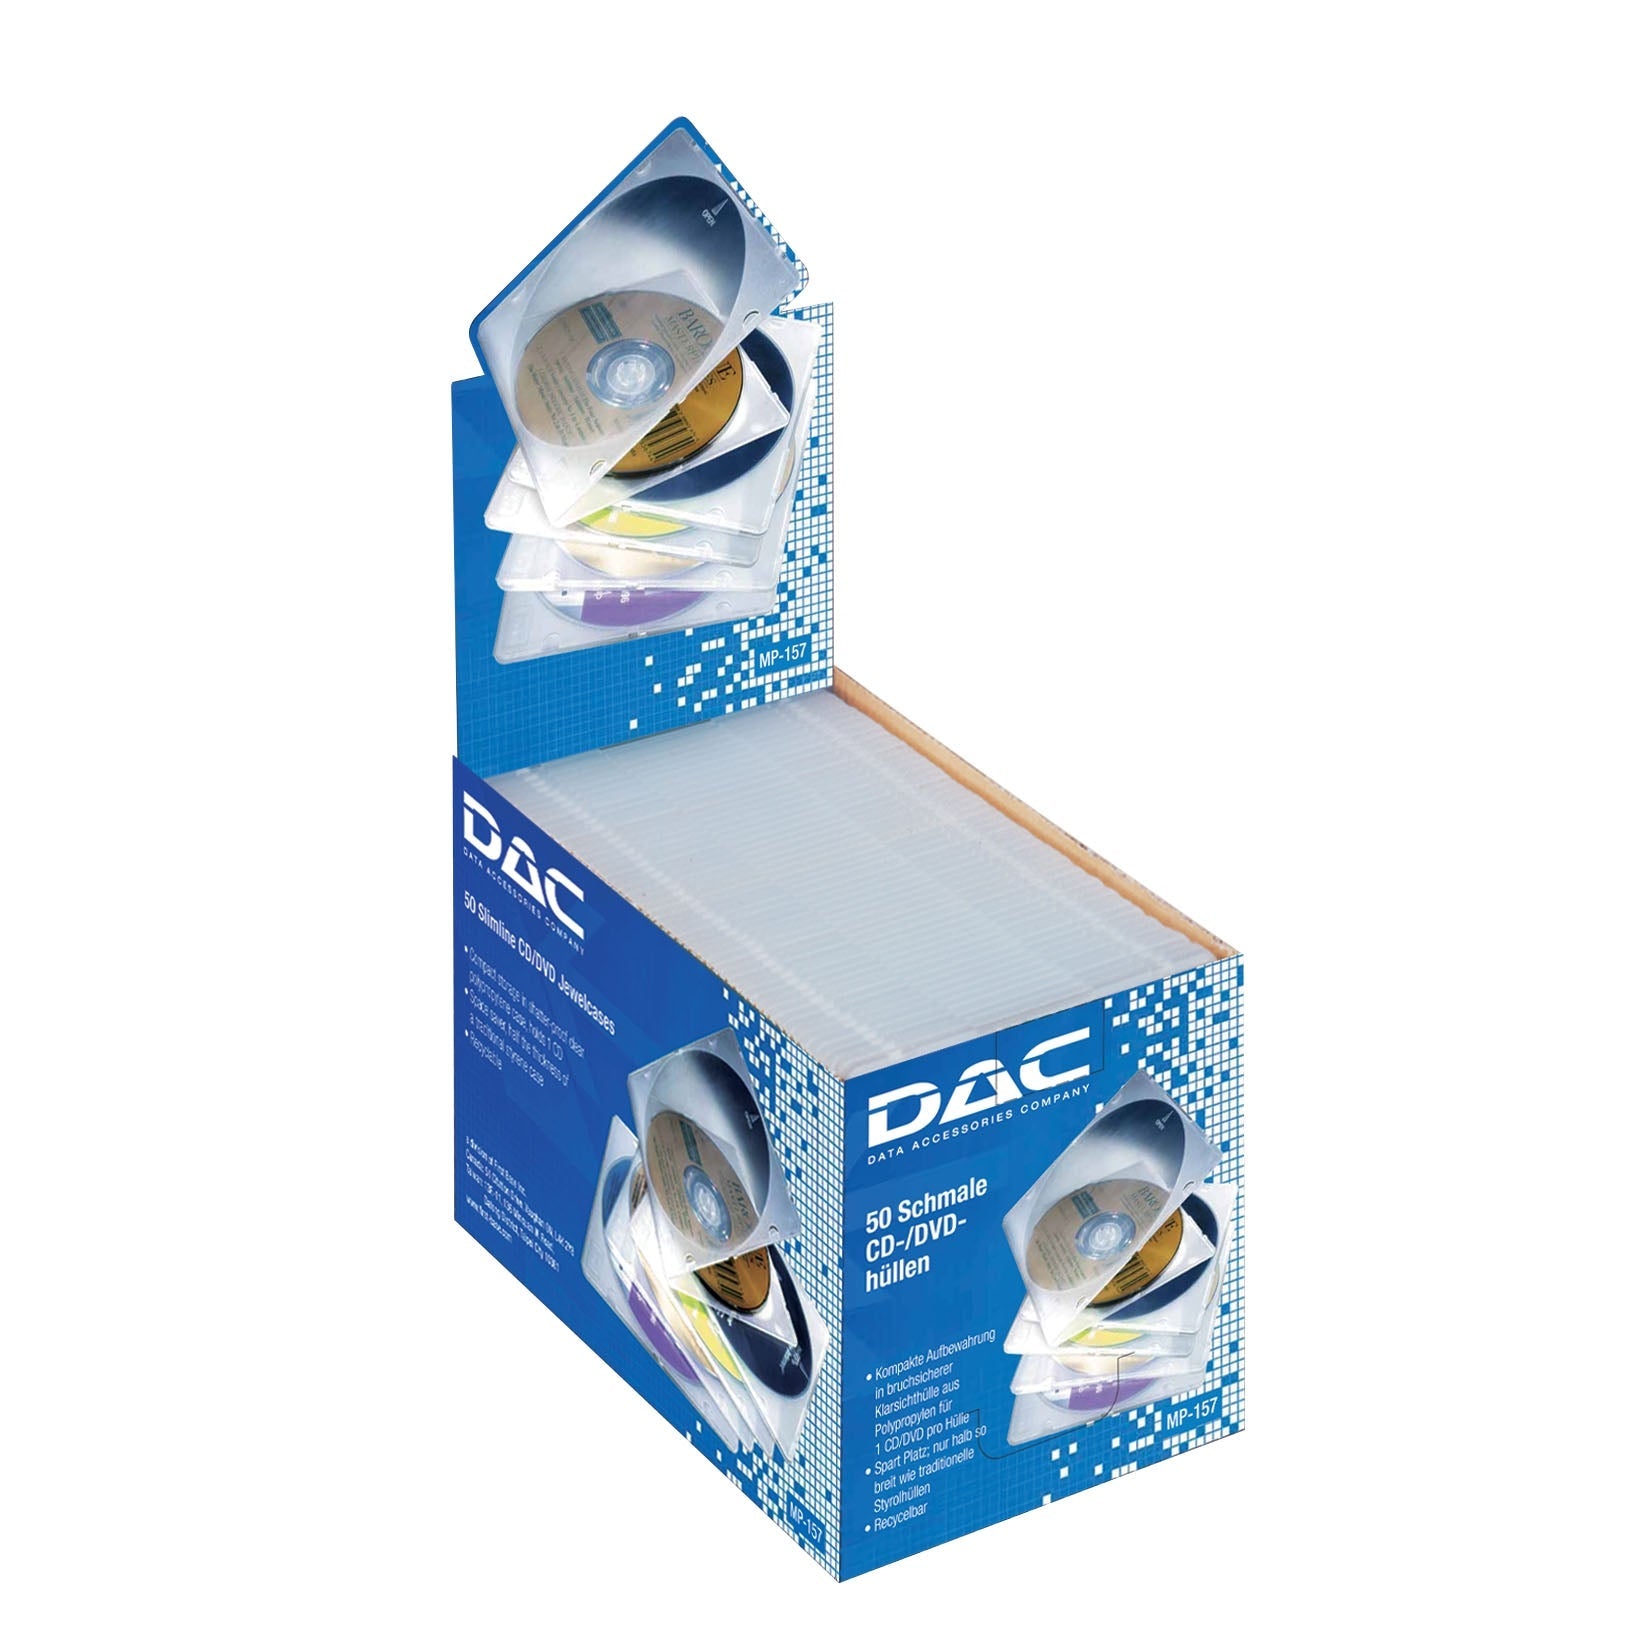 CD/DVD clear cases compact cd holder